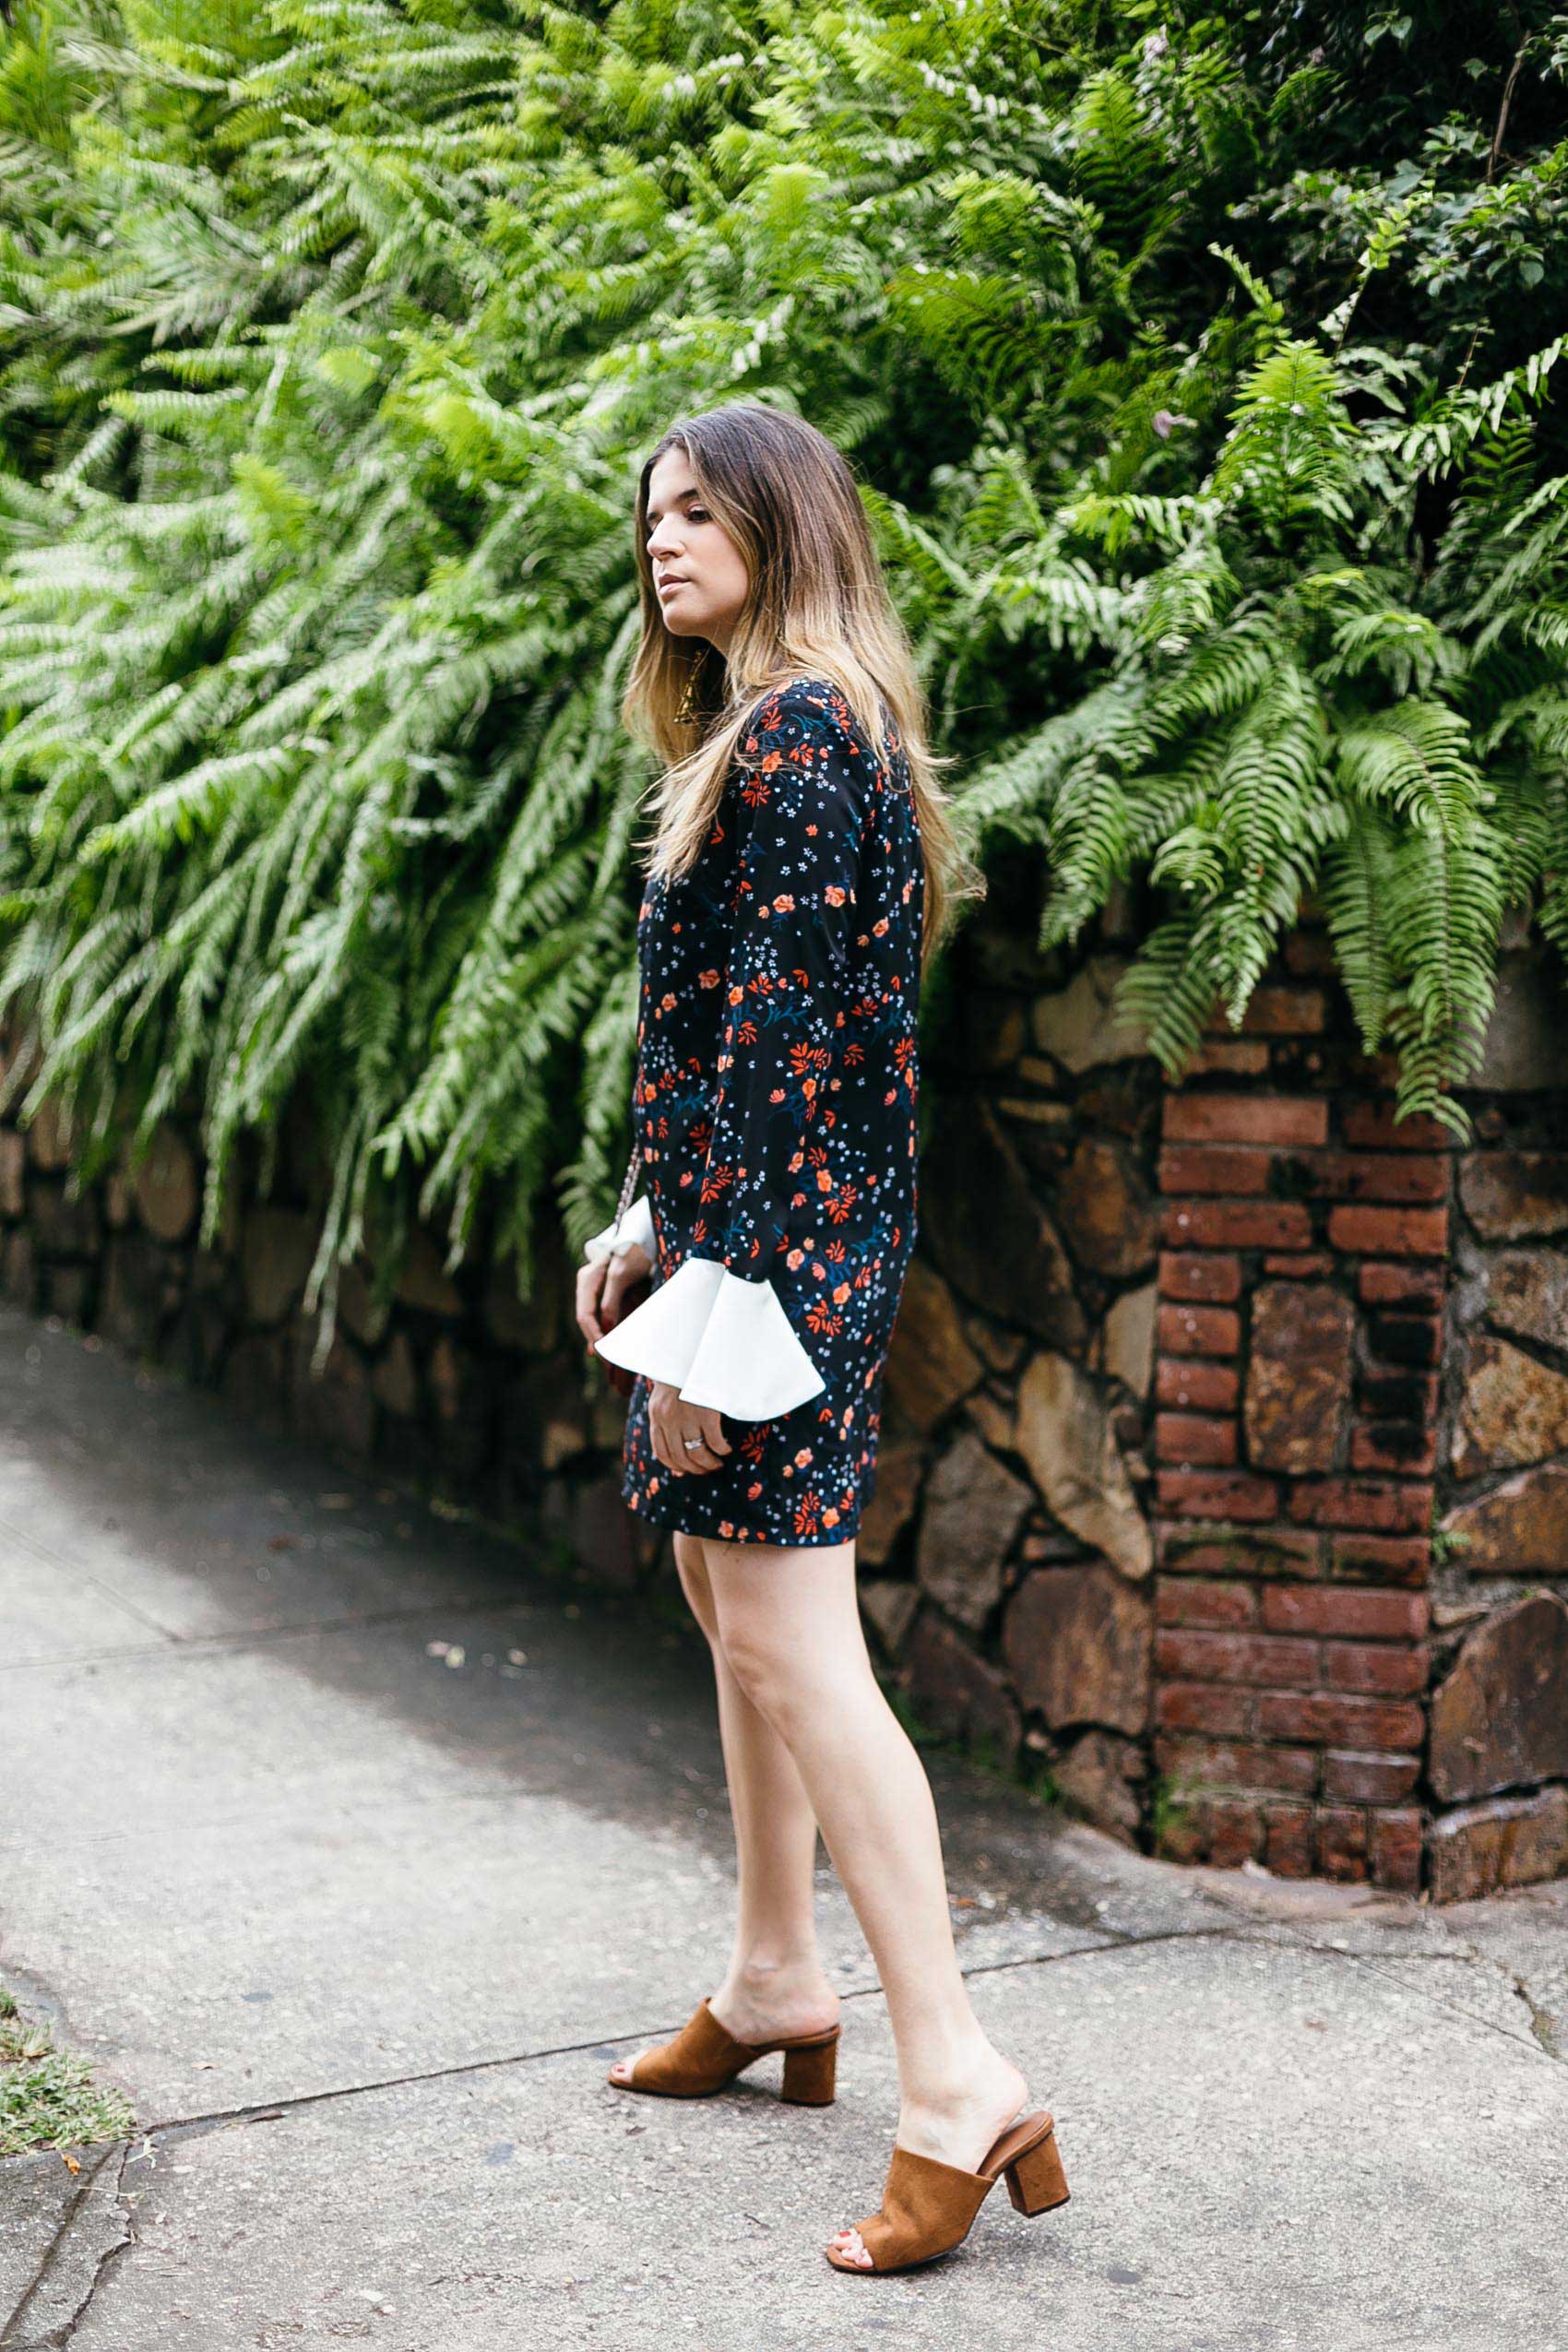 Maristella wearing a black floral dress and suede block heel mules